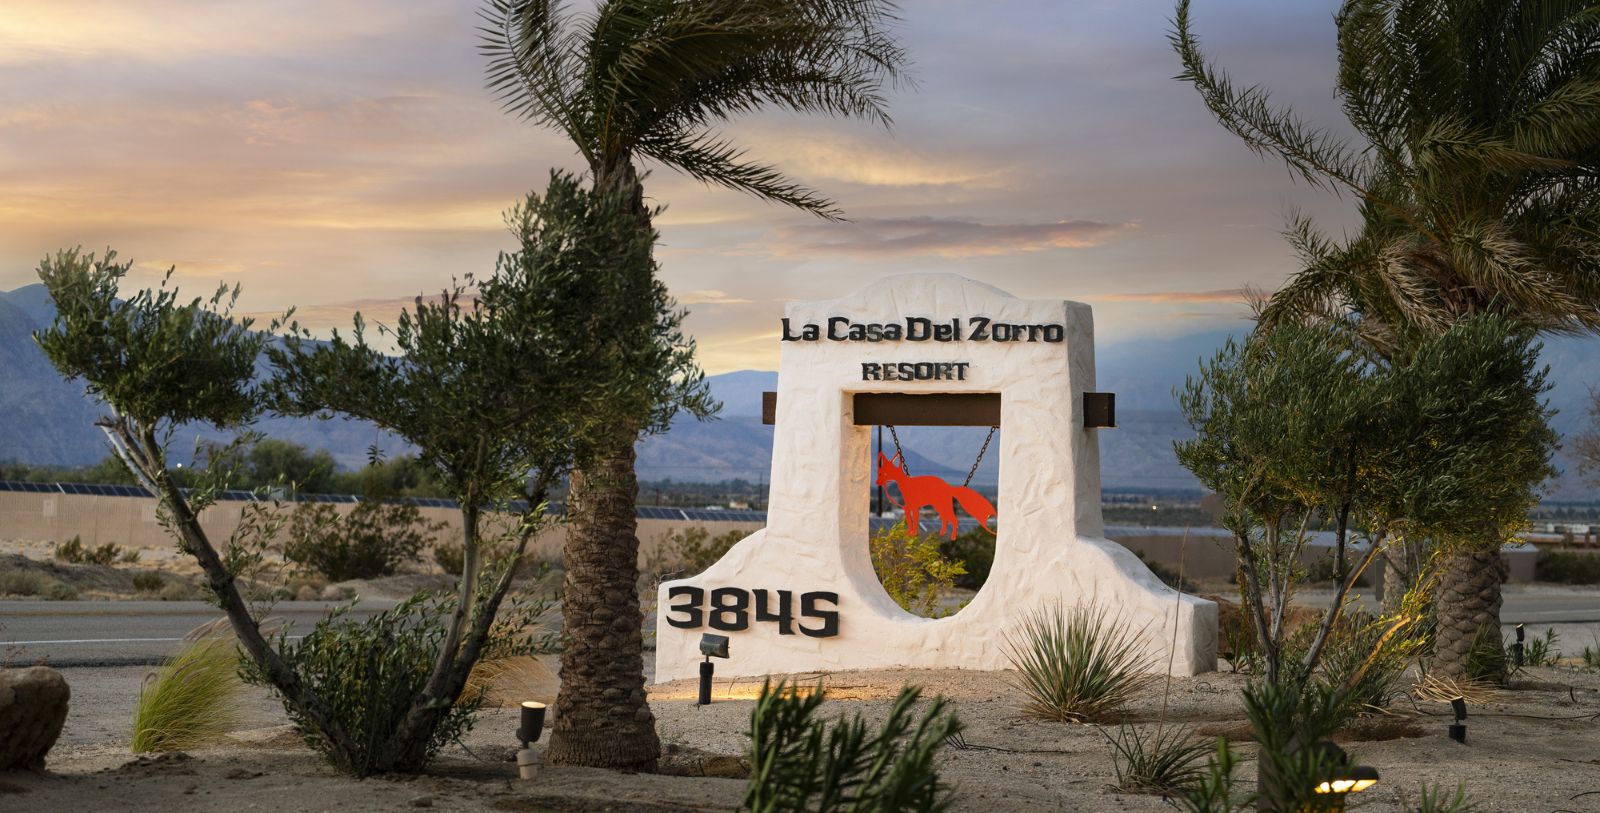 Discover the incredible history of La Casa Del Zorro Desert Resort & Spa and how it quickly became one of Southern California’s most popular sightseeing destinations.